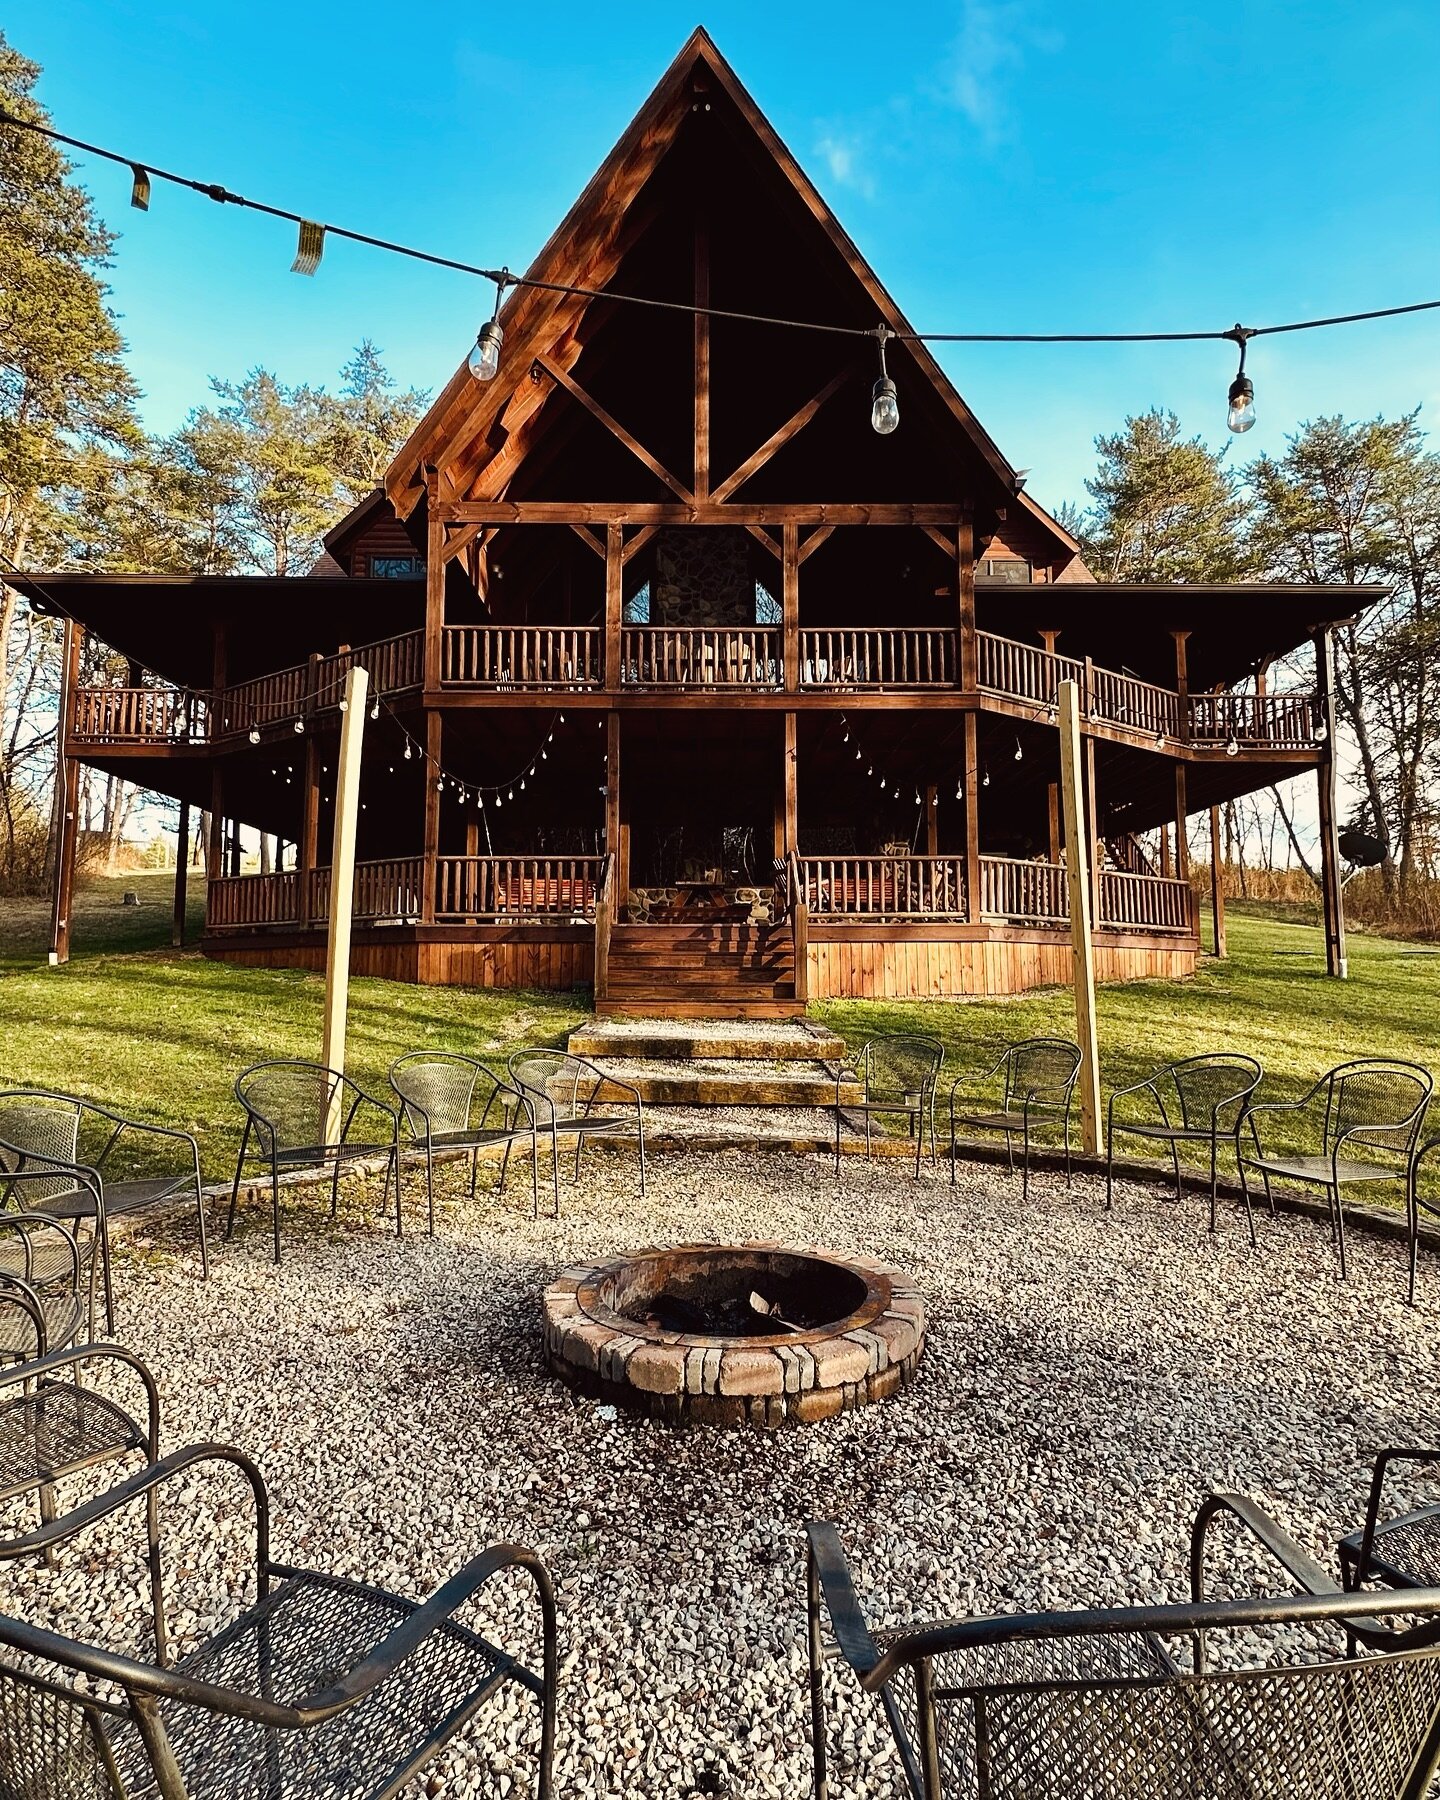 Gather &lsquo;round the flames for an unforgettable night of stories, s&rsquo;mores, and starlit skies 🔥✨ Cabin life at its finest under the string lights at River Rock Lodge. 

#cabin #hockinghills #cozy #ohiocabins #vrbo #vacationrental #bonfire #